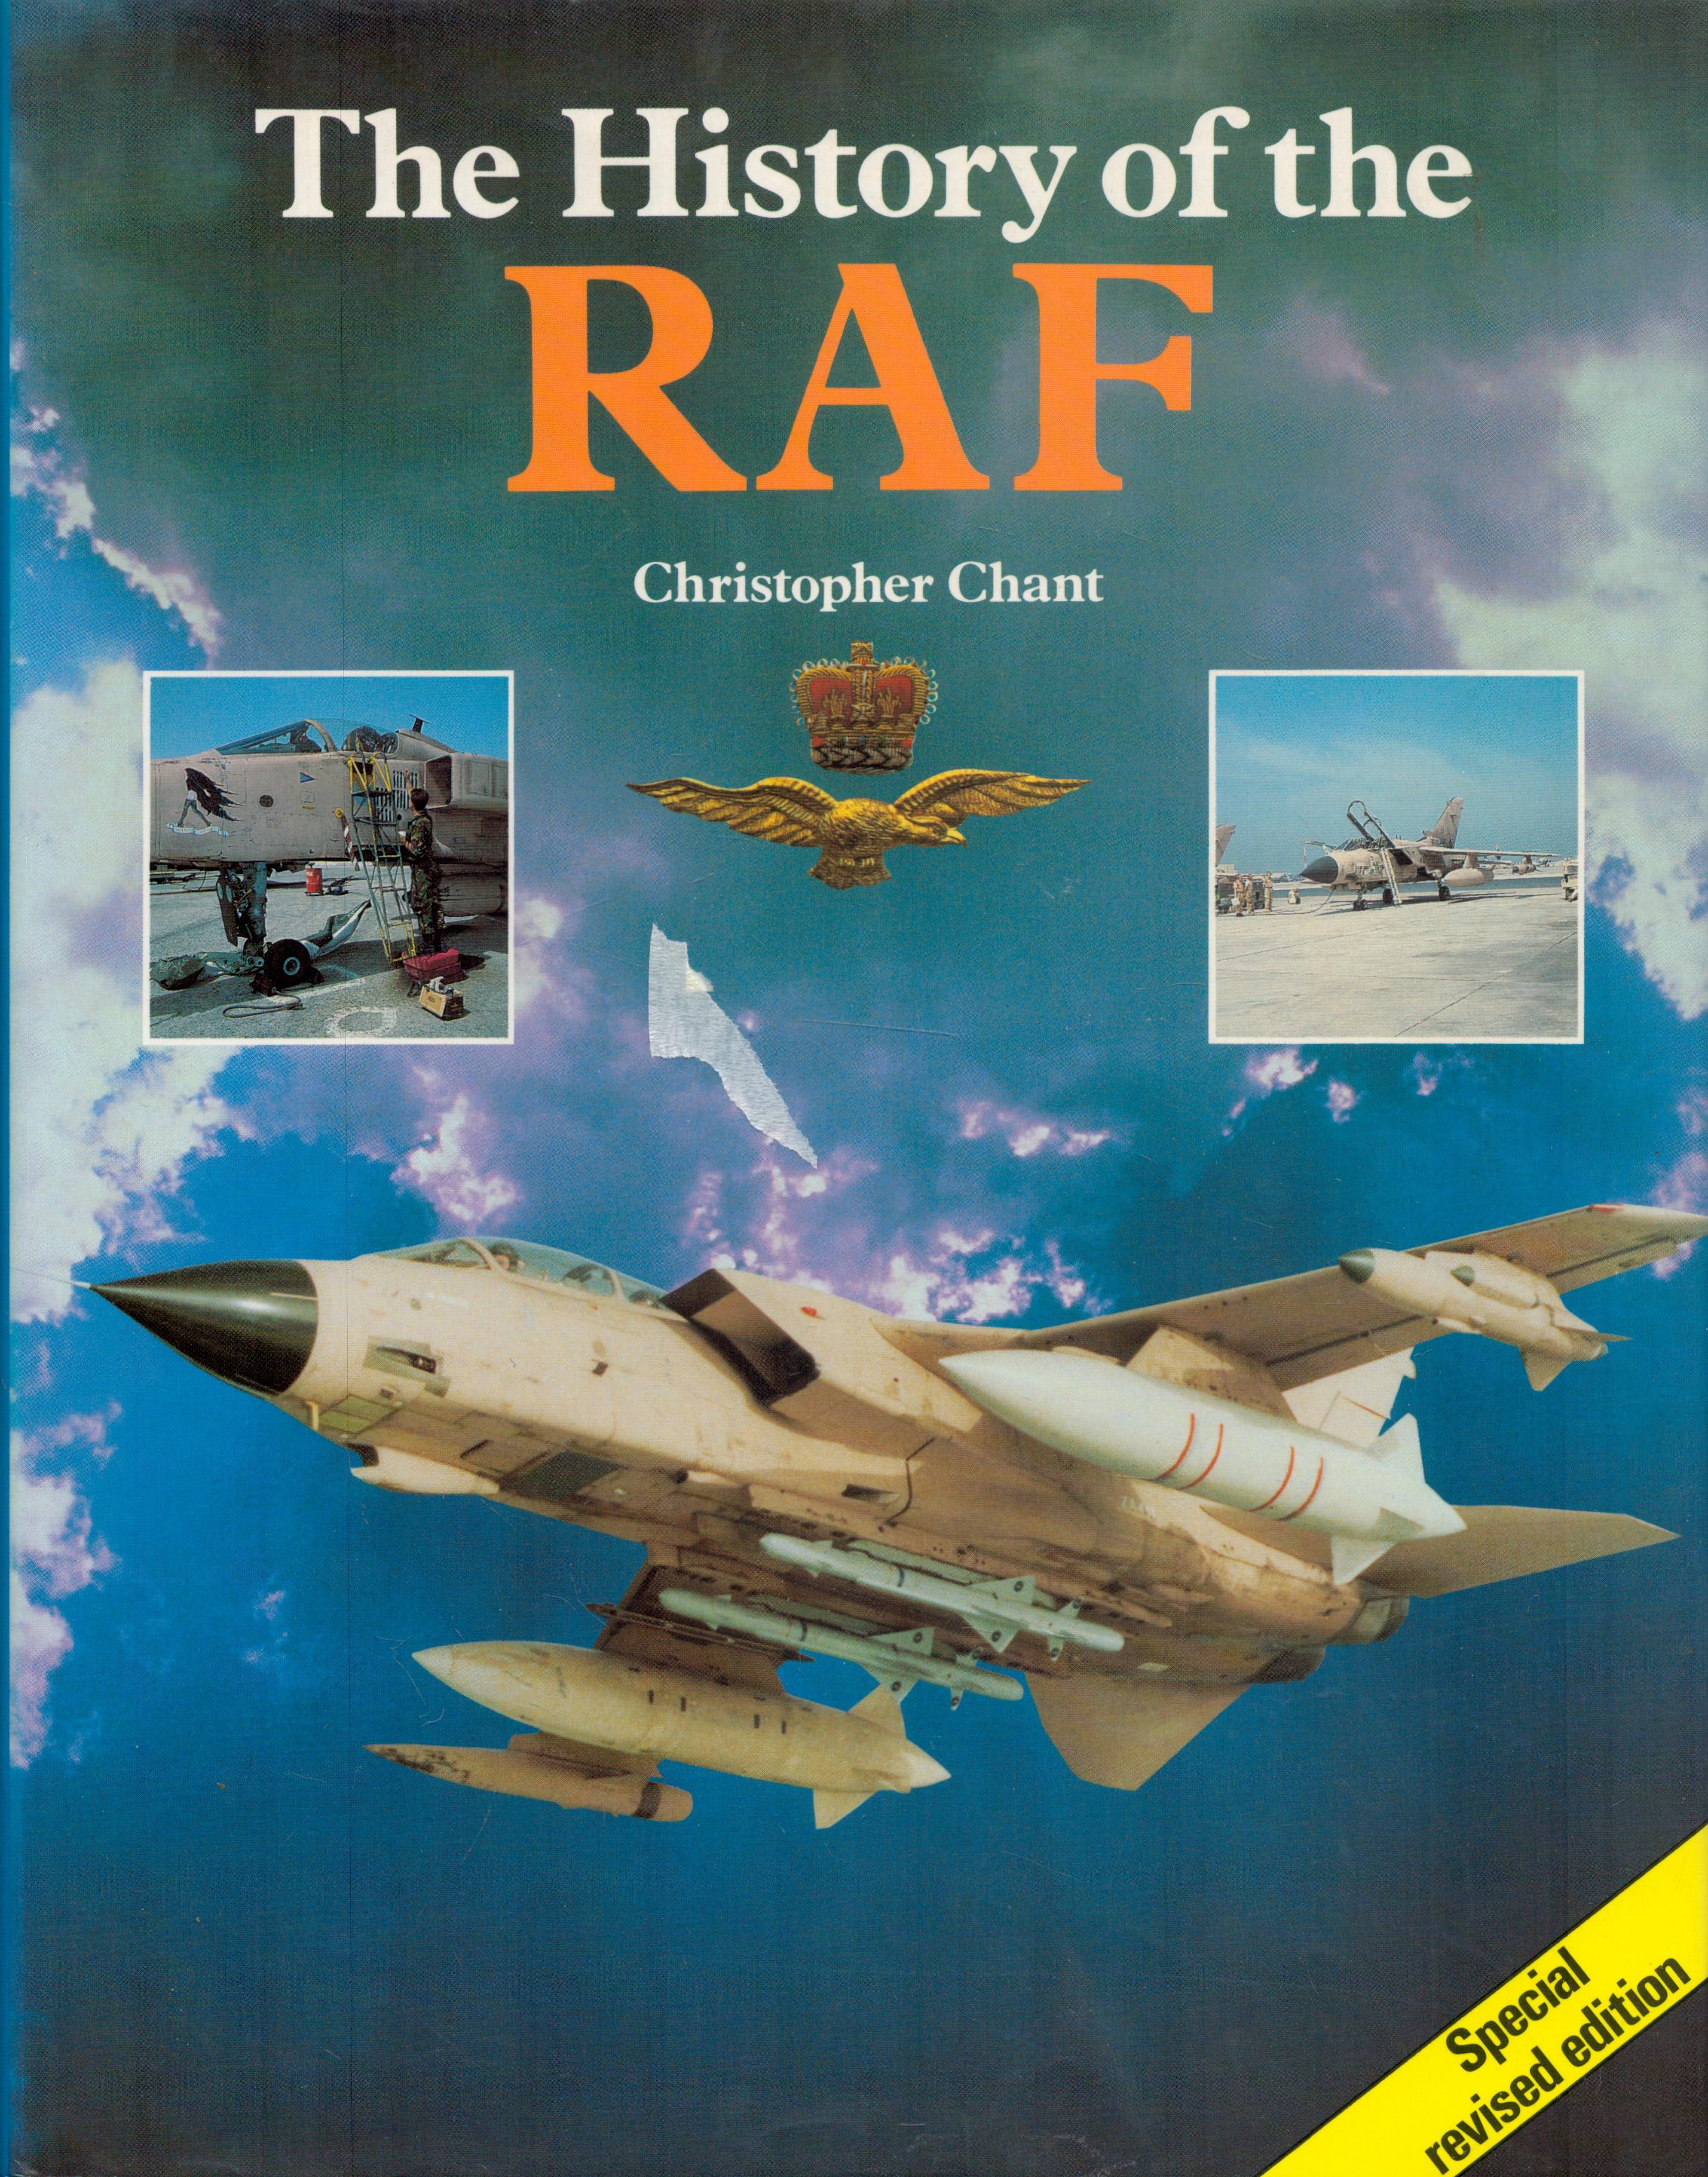 The History of The RAF by Christopher Chant Hardback Book 1994 Special Revised Edition published